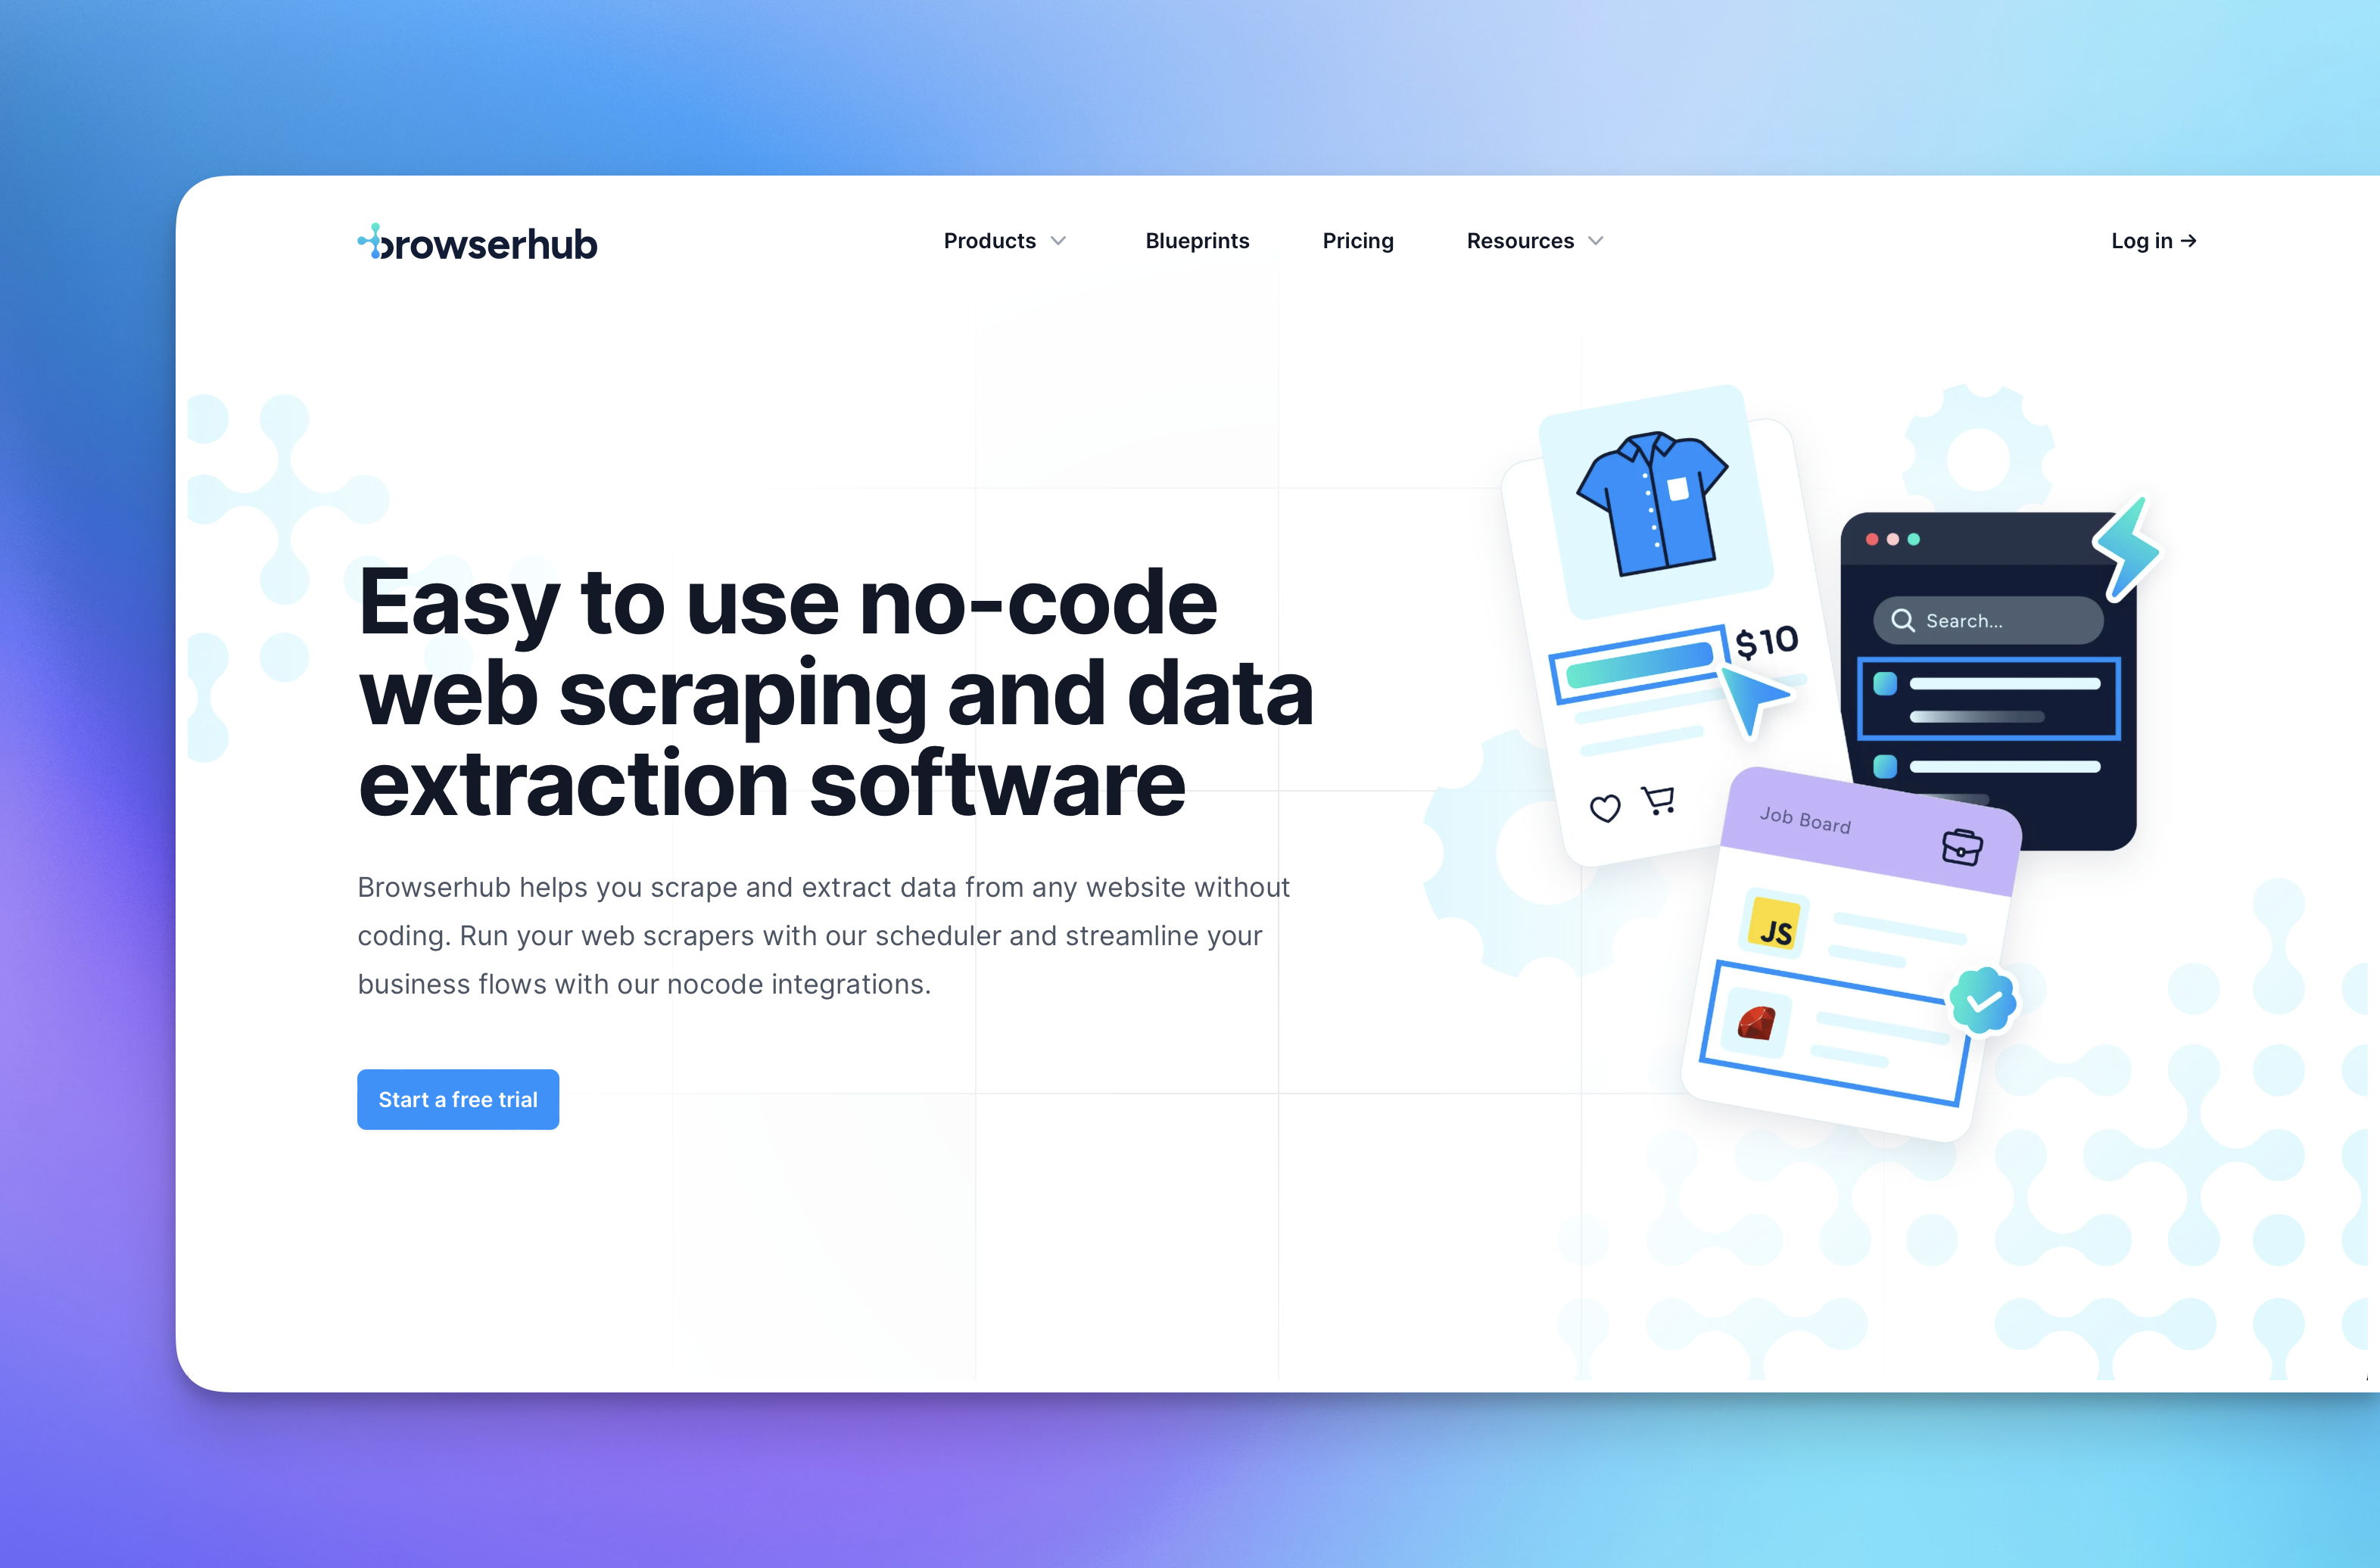 startuptile Browserhub-Easy to use no-code web scraping and data extraction tool